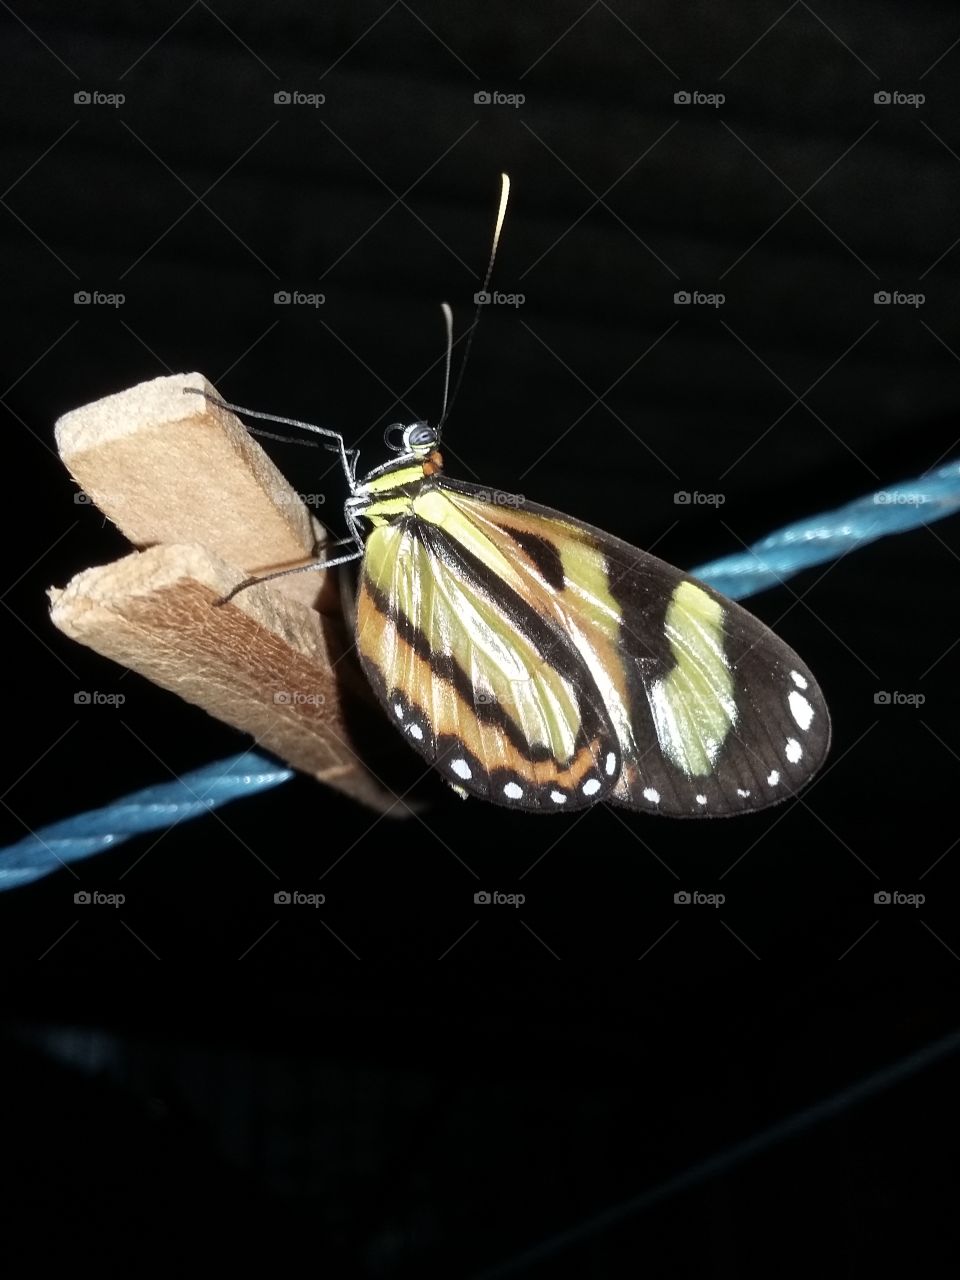 Picture taken at night of a butterfly on the clothespin on the clothesline.